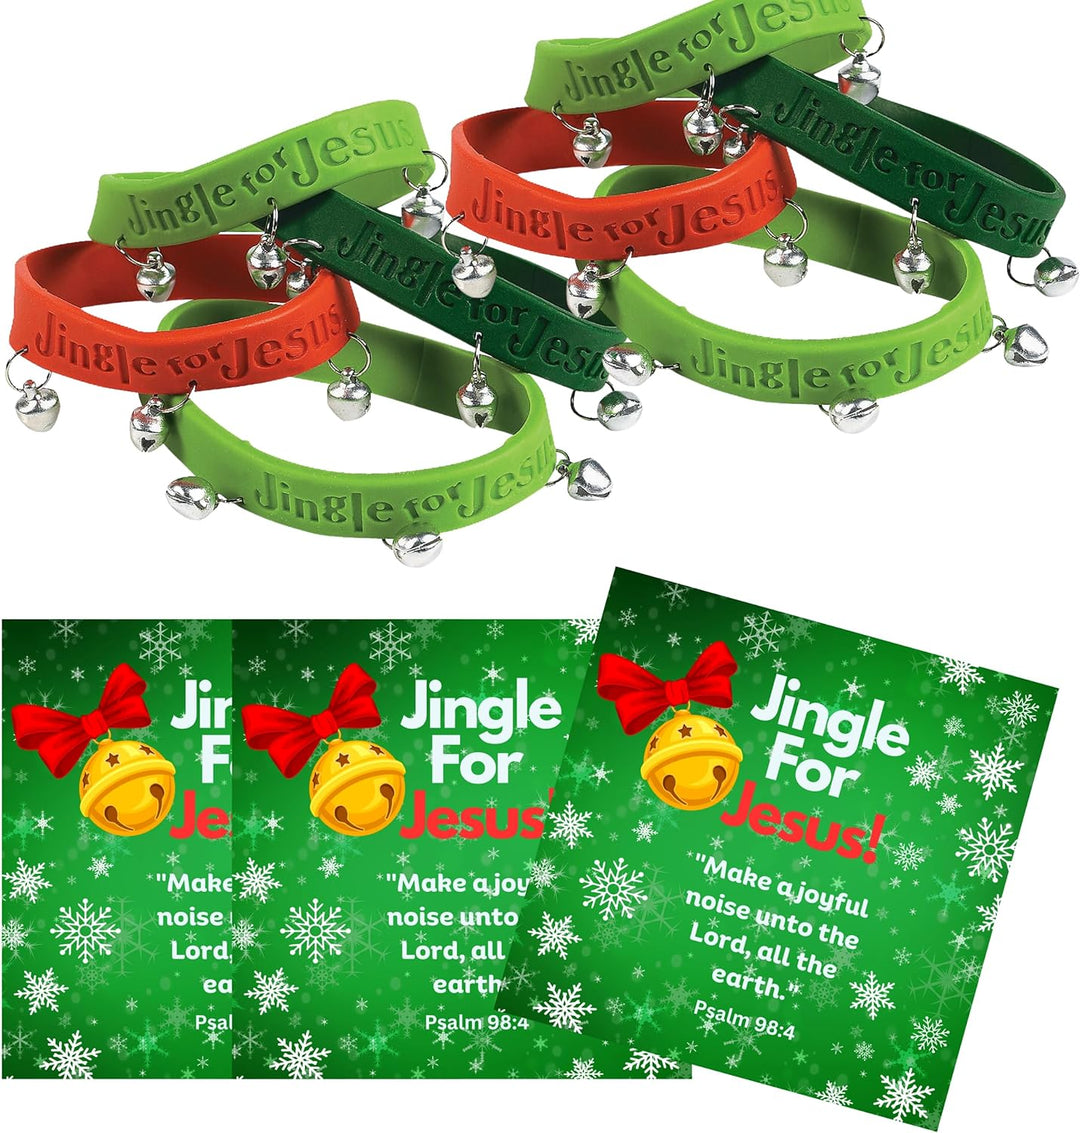 24 Sets Of Jingle For Jesus Greeting Cards With Jingle for Jesus Rubber Bracelets with Bells - Christmas Greeting Cards - Christian Christmas Party Favors